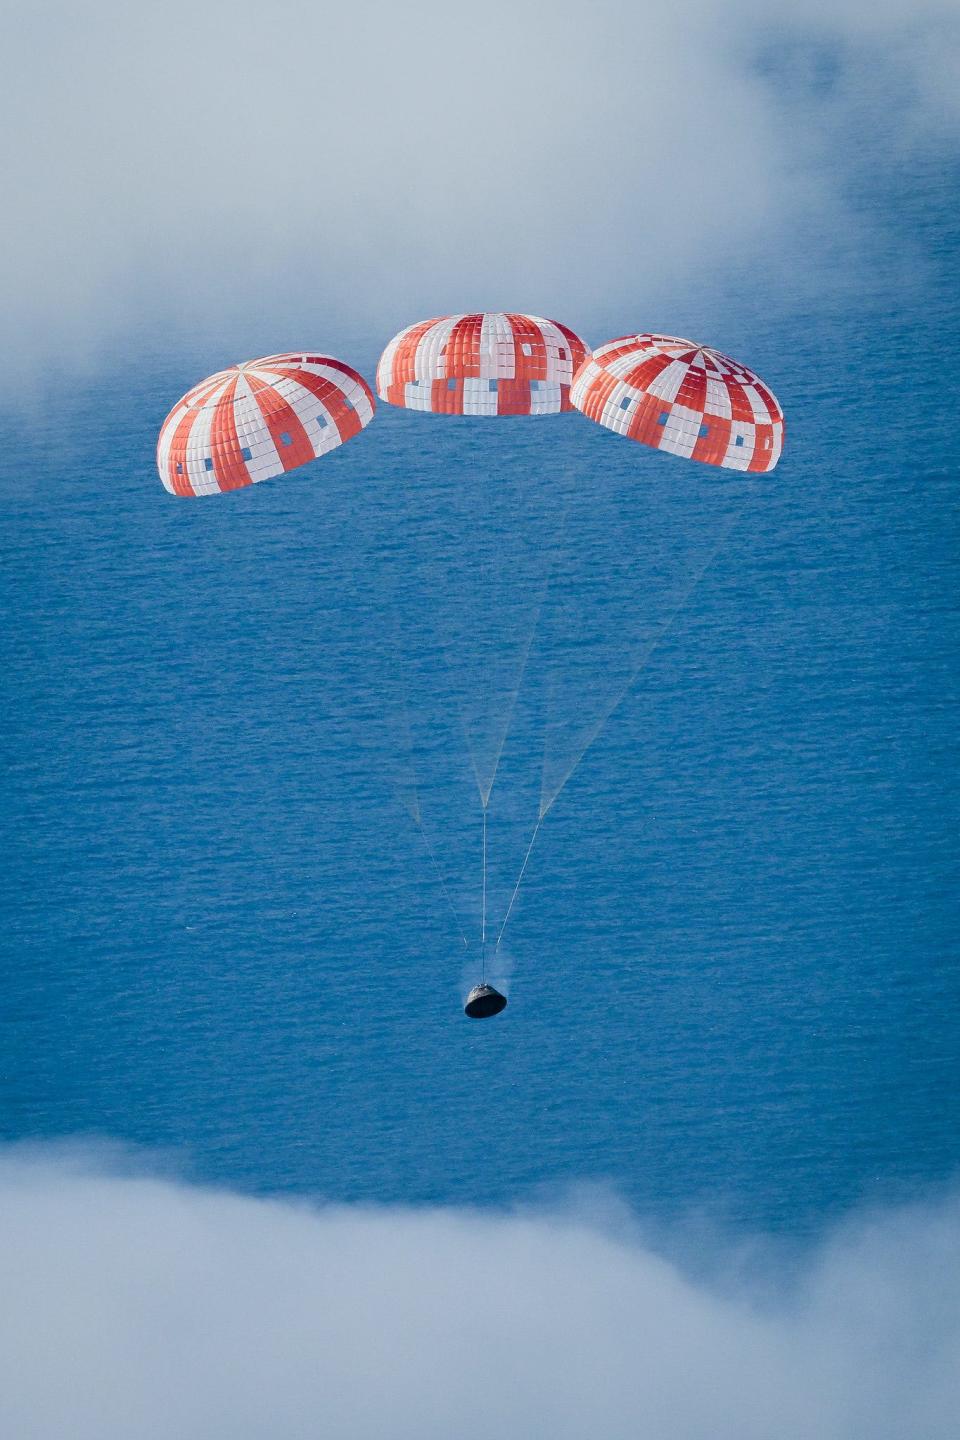 At 12:40 p.m. EST, Dec. 11, 2022, NASA’s Orion spacecraft for the Artemis I mission splashed down in the Pacific Ocean after a 25.5 day mission to the Moon. Orion will be recovered by NASA’s Landing and Recovery team, U.S. Navy and Department of Defense partners aboard the USS Portland.